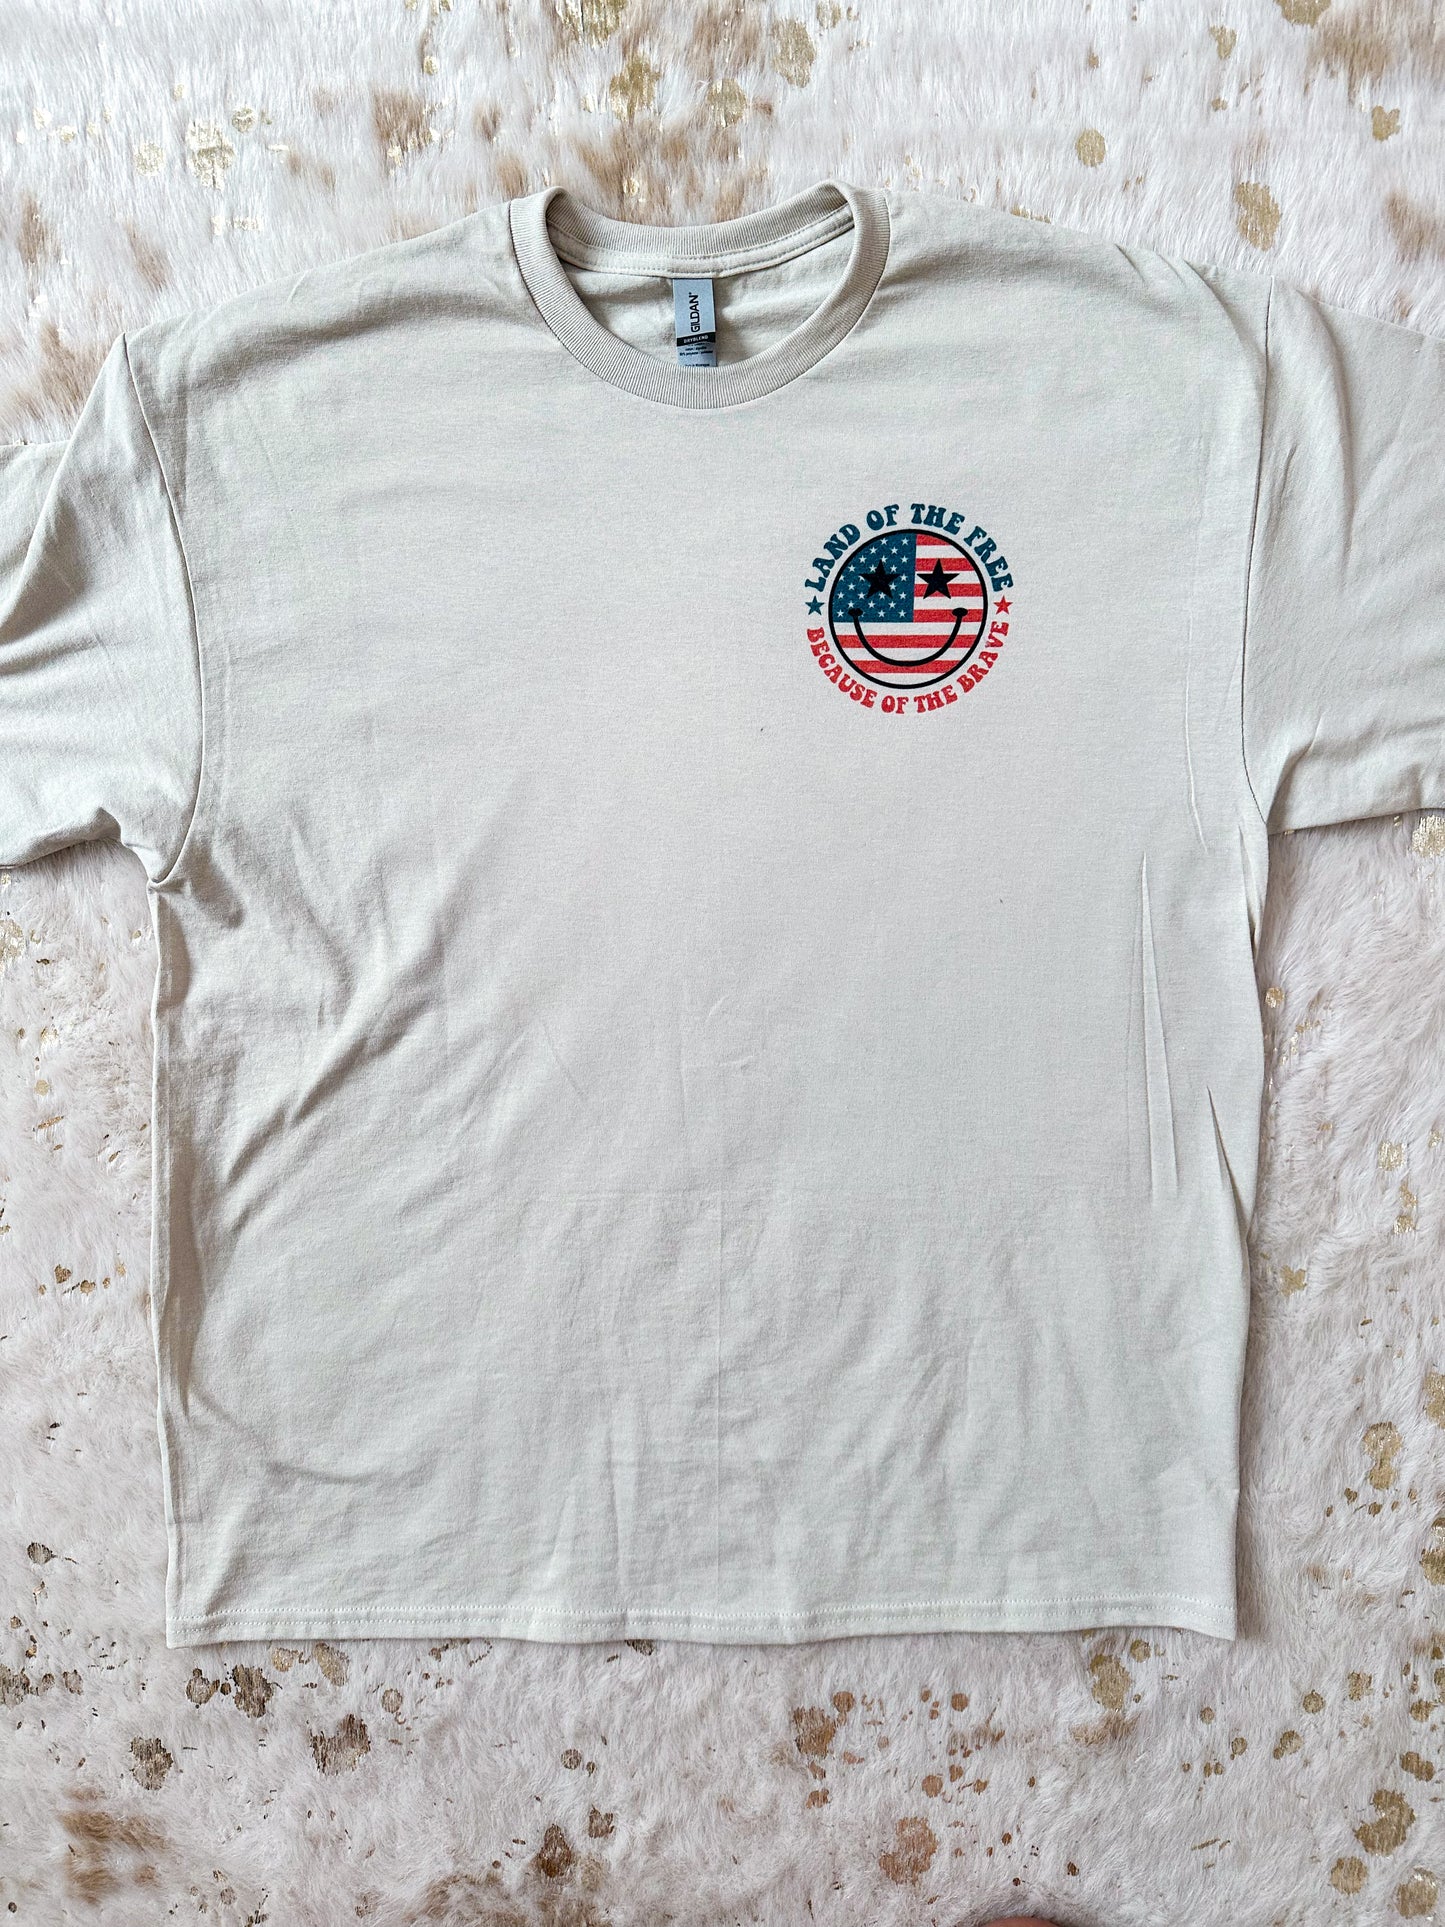 Discounted Land of the Free shirt